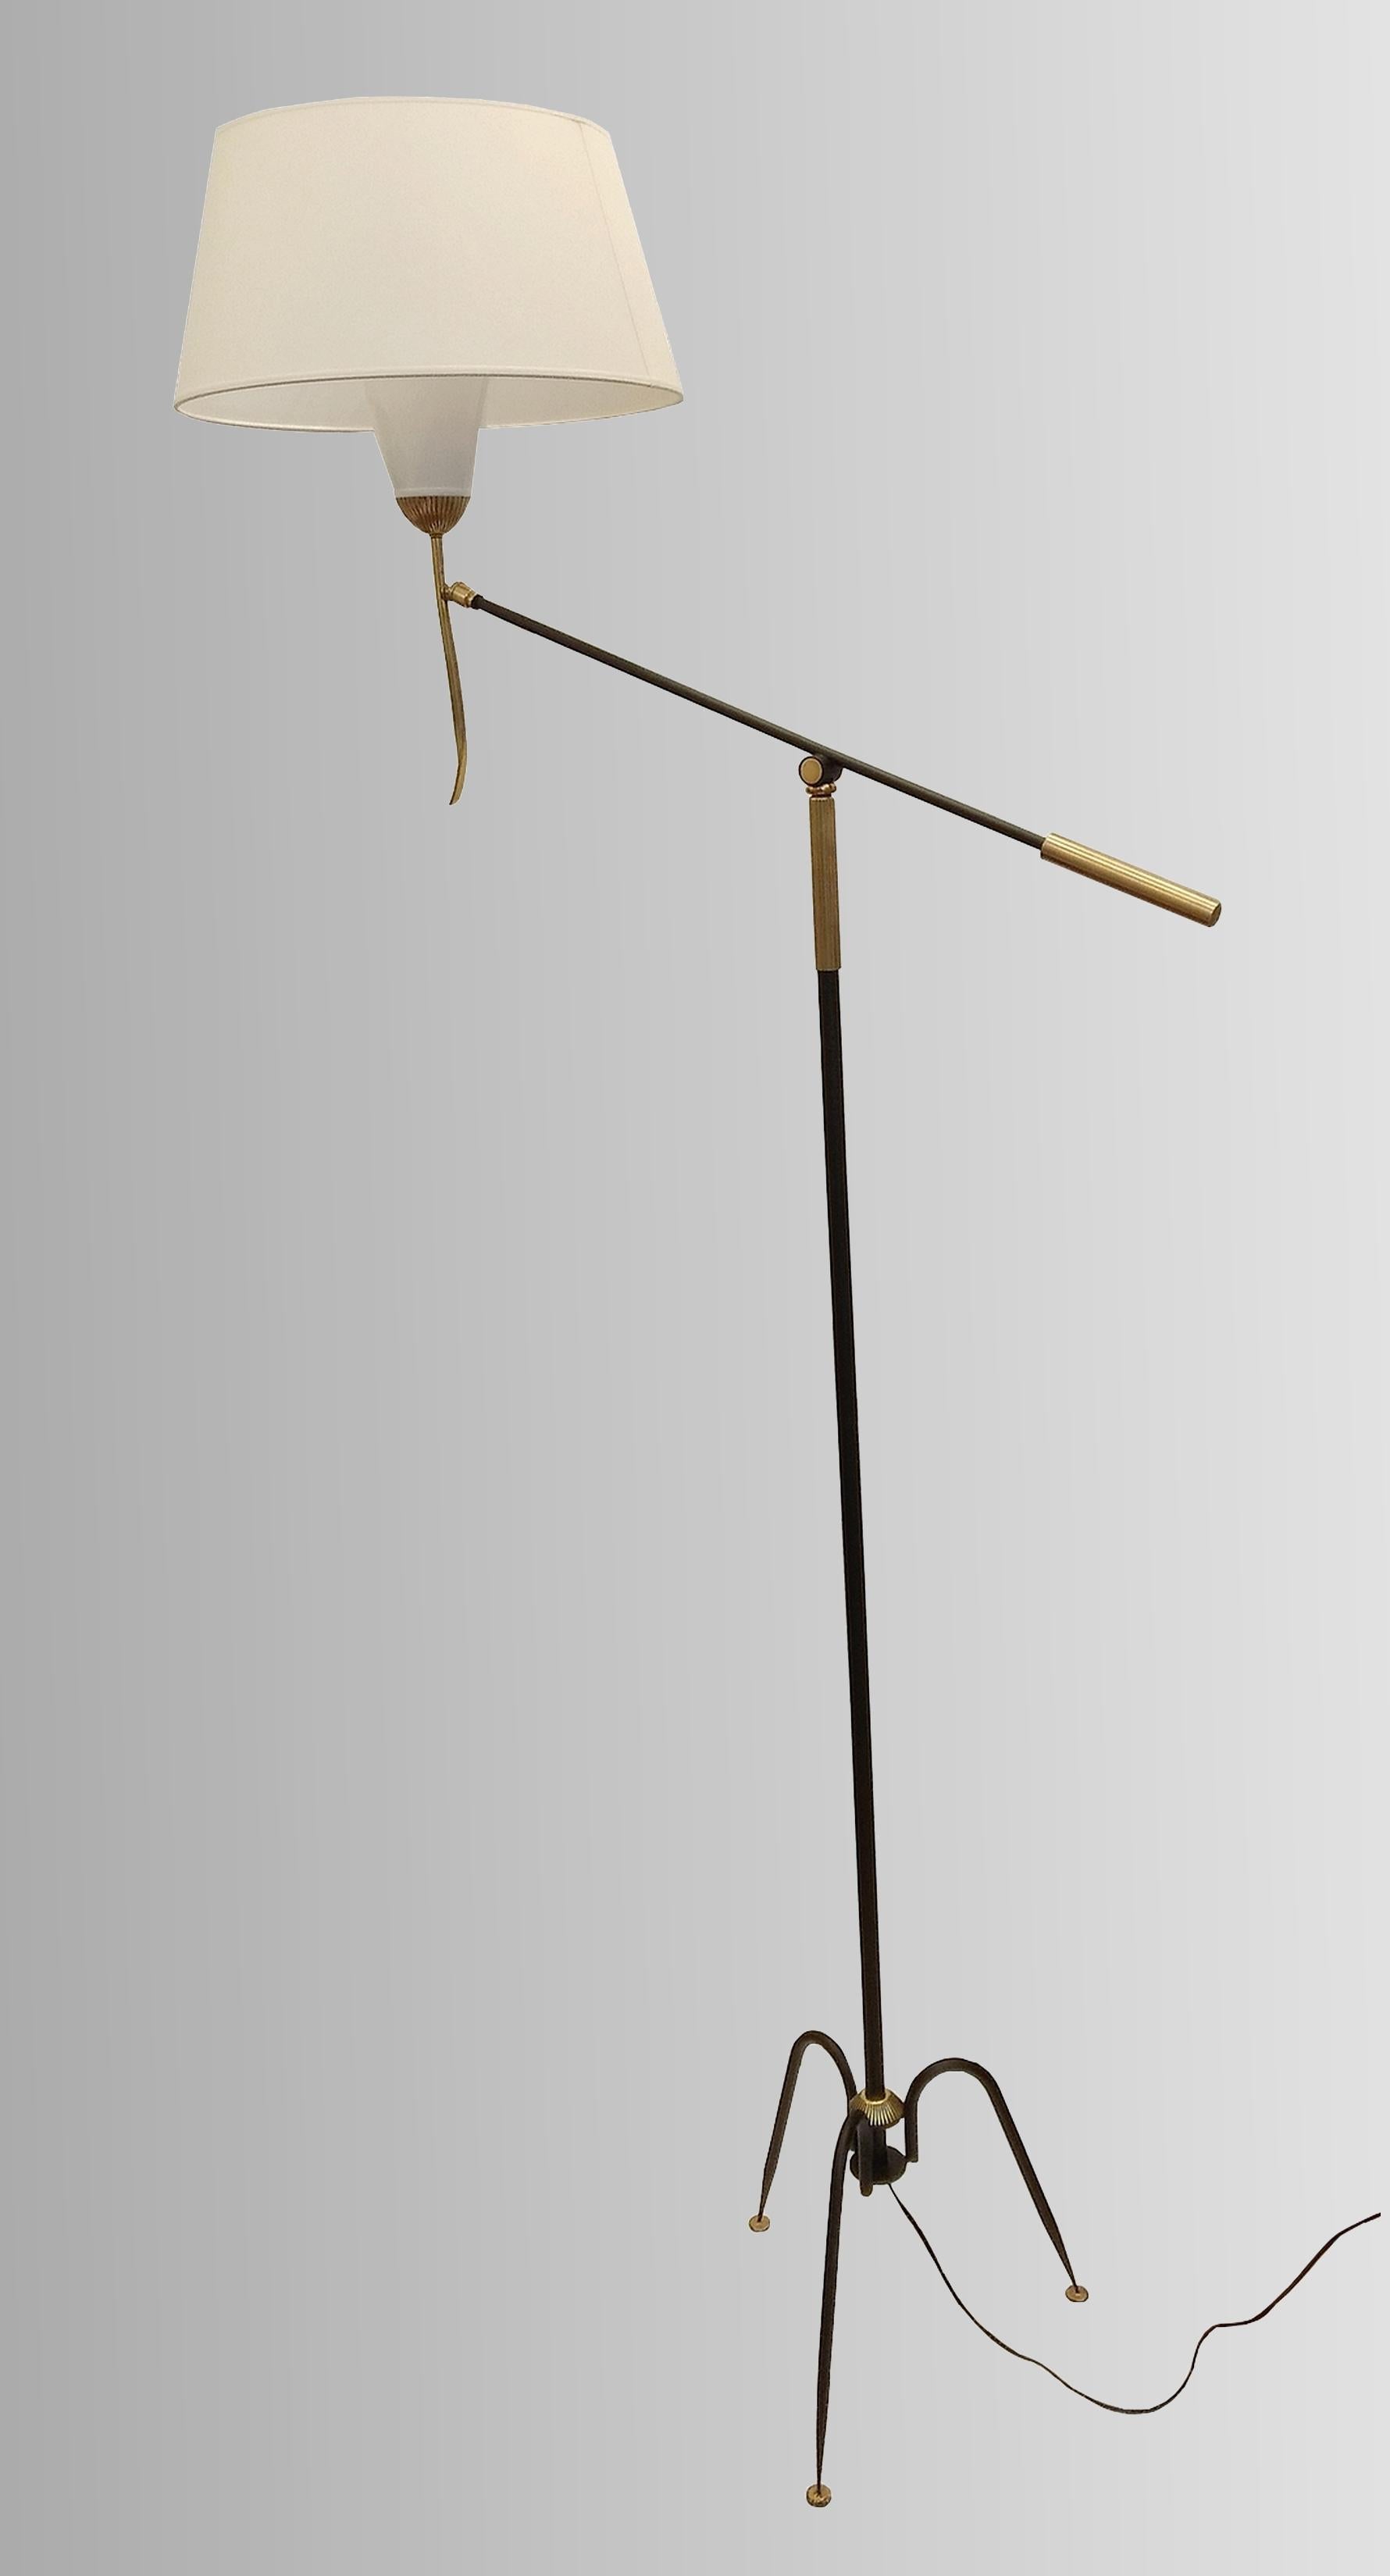 T644 orientable floor lamp with counterweight by Maison Lunel
Royal Lumiere Edition 1950.
New cotton and rhodoid shade remade identical to the original, black lacquered steel and polished brass.